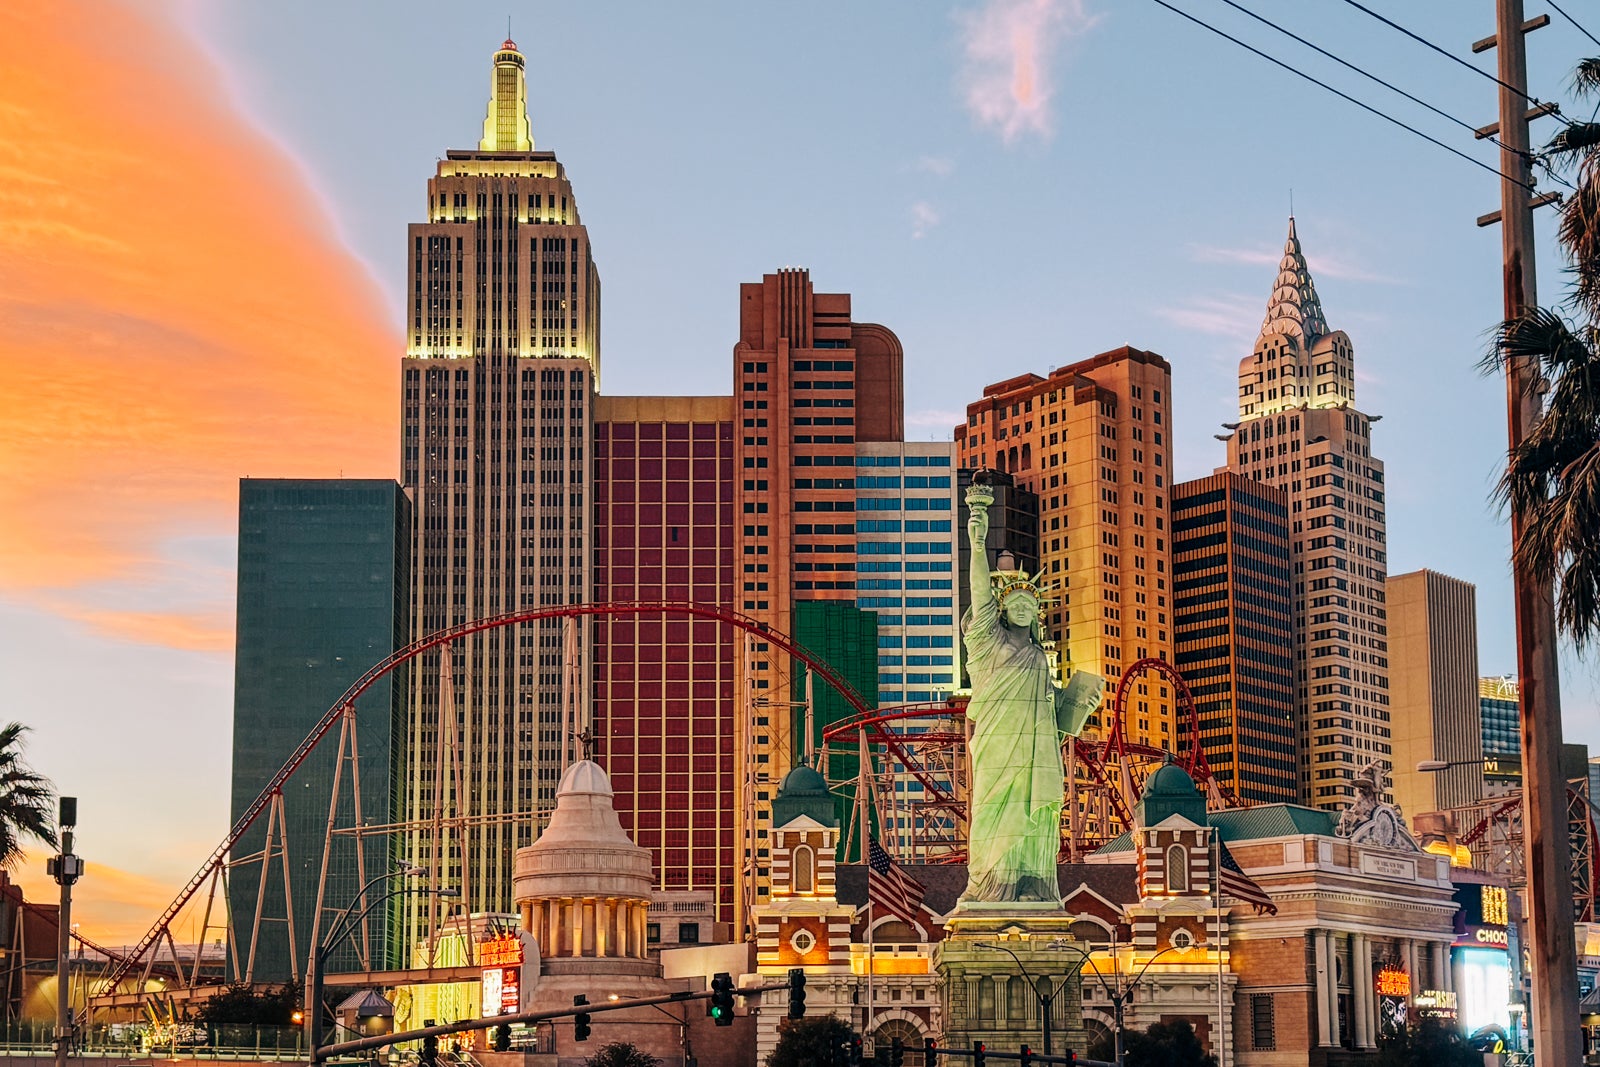 A thrilling roller coaster and terrible food: My stay at the New York New York in Las Vegas